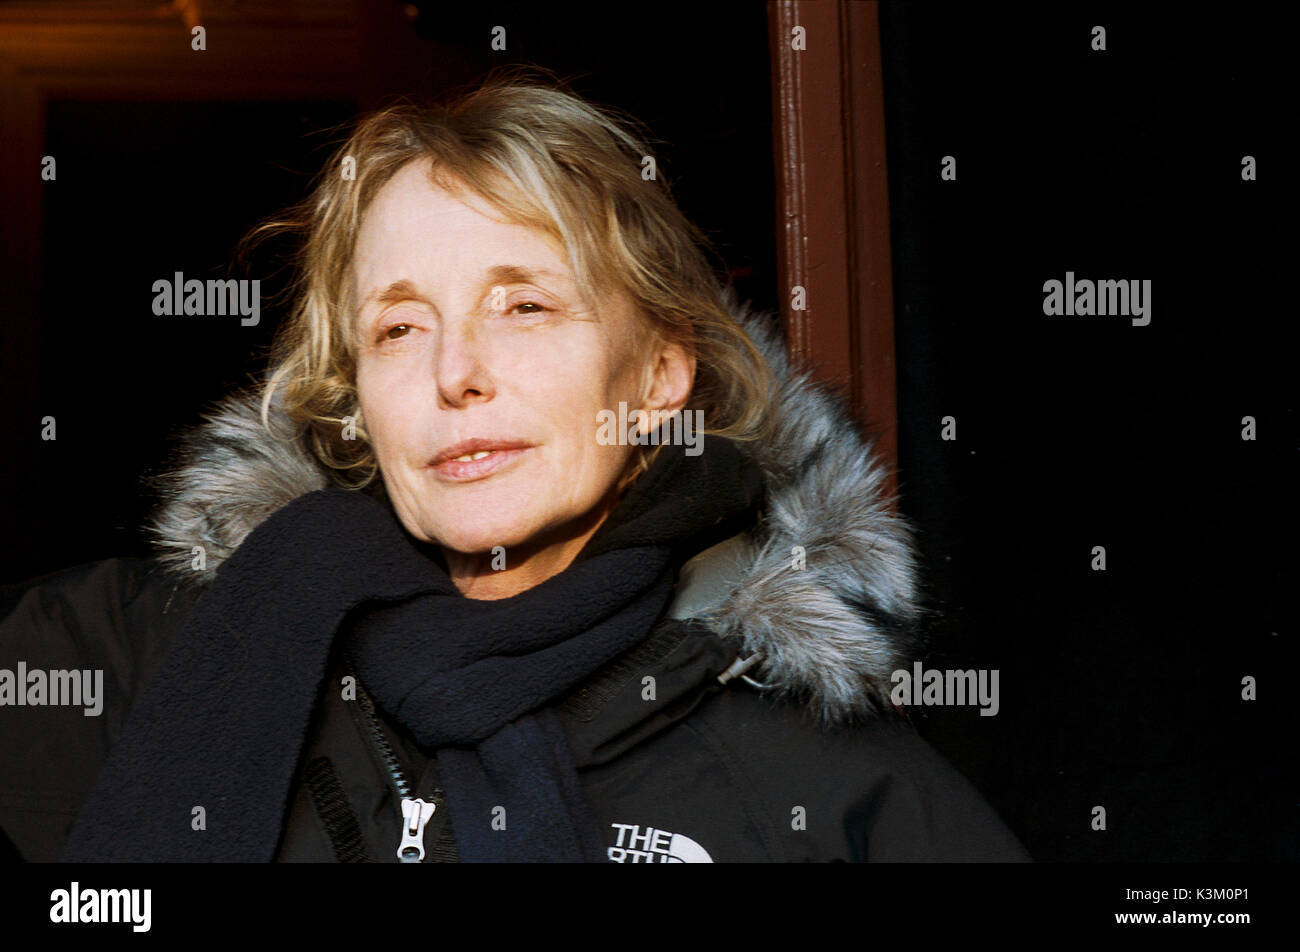 35 RHUMS aka 35 SHOTS OF RUM Director CLAIRE DENIS       Date: 2008 Stock Photo